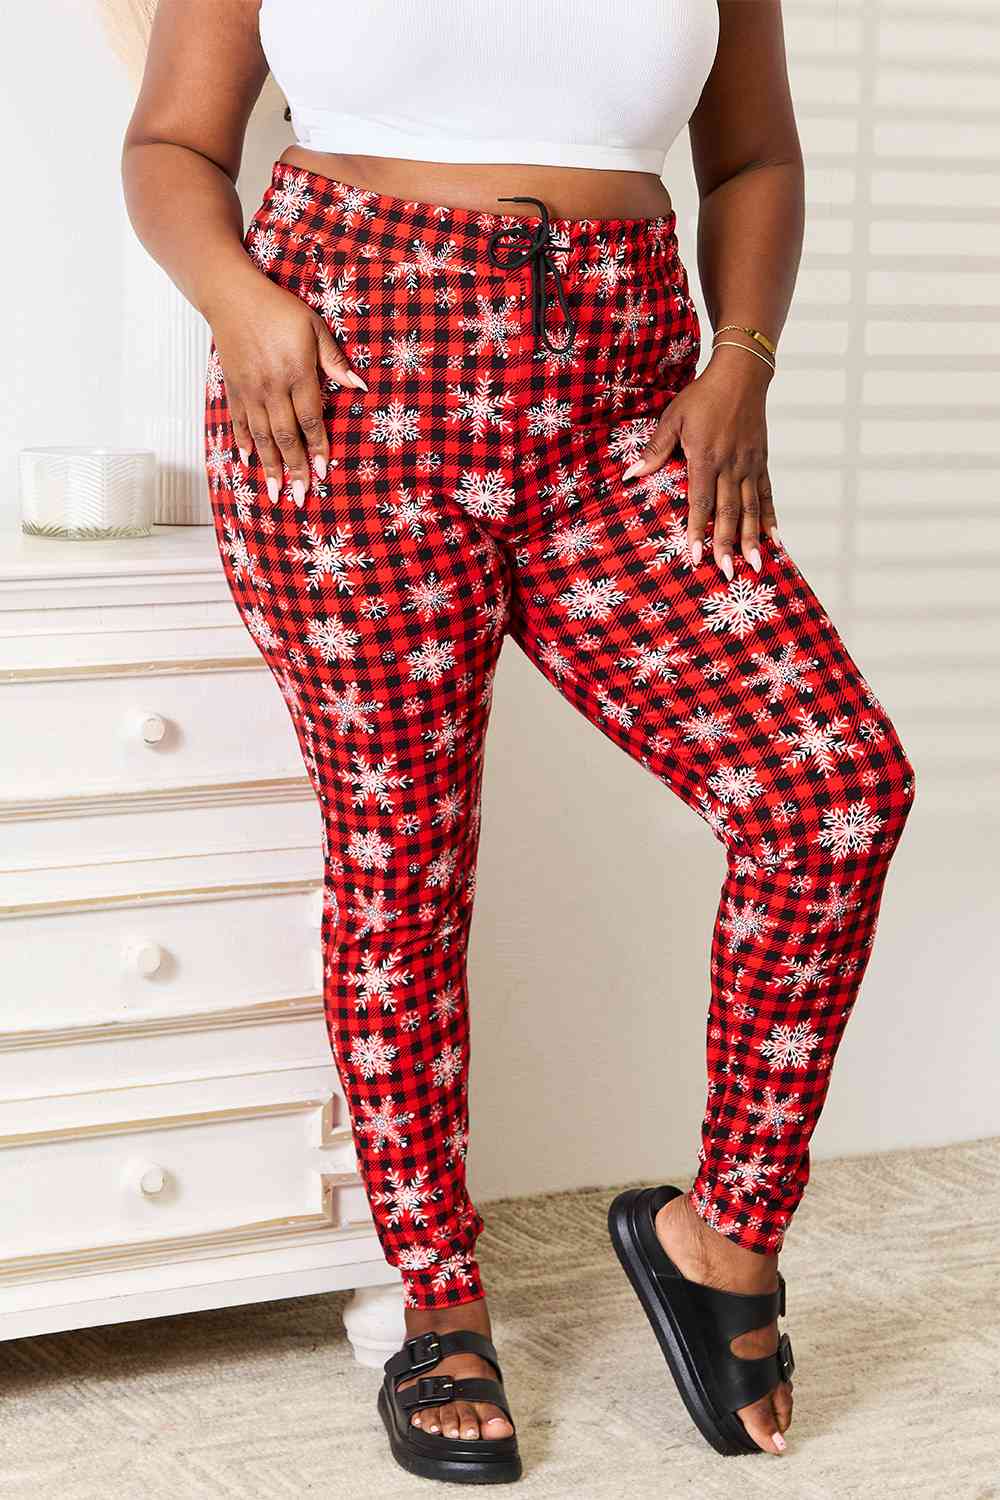 "Alt text: A close-up view of Leggings Depot Full Size Holiday Snowflake Print Joggers, featuring a festive snowflake pattern perfect for the holiday season."